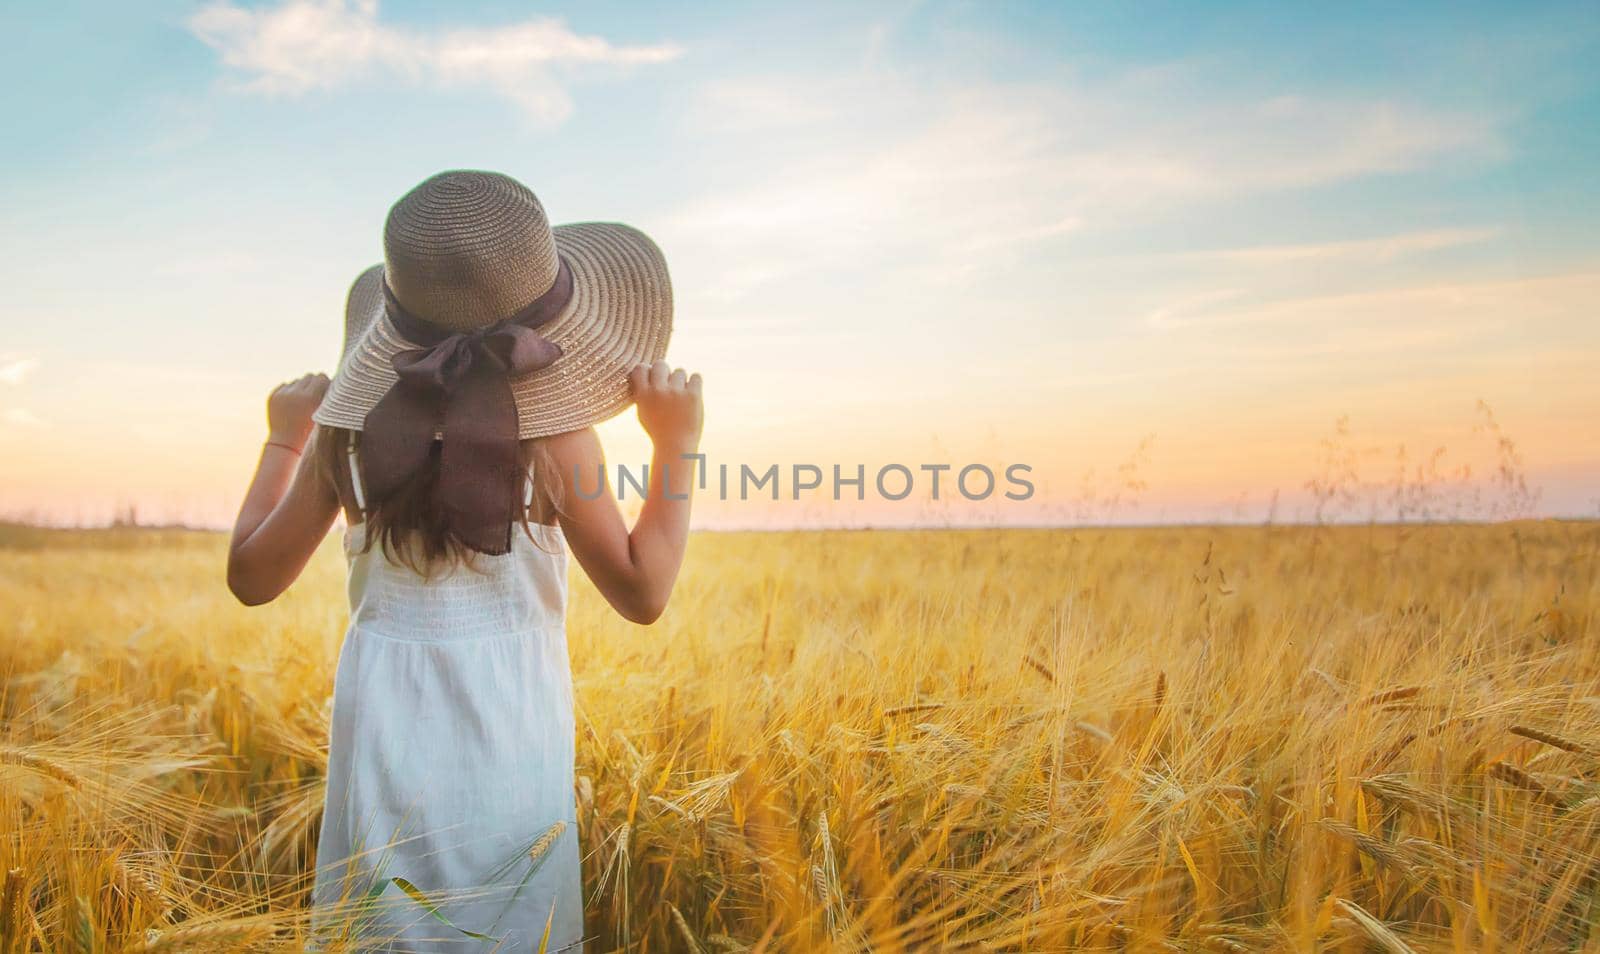 A child in a wheat field. Sunset. Selective focus. nature.